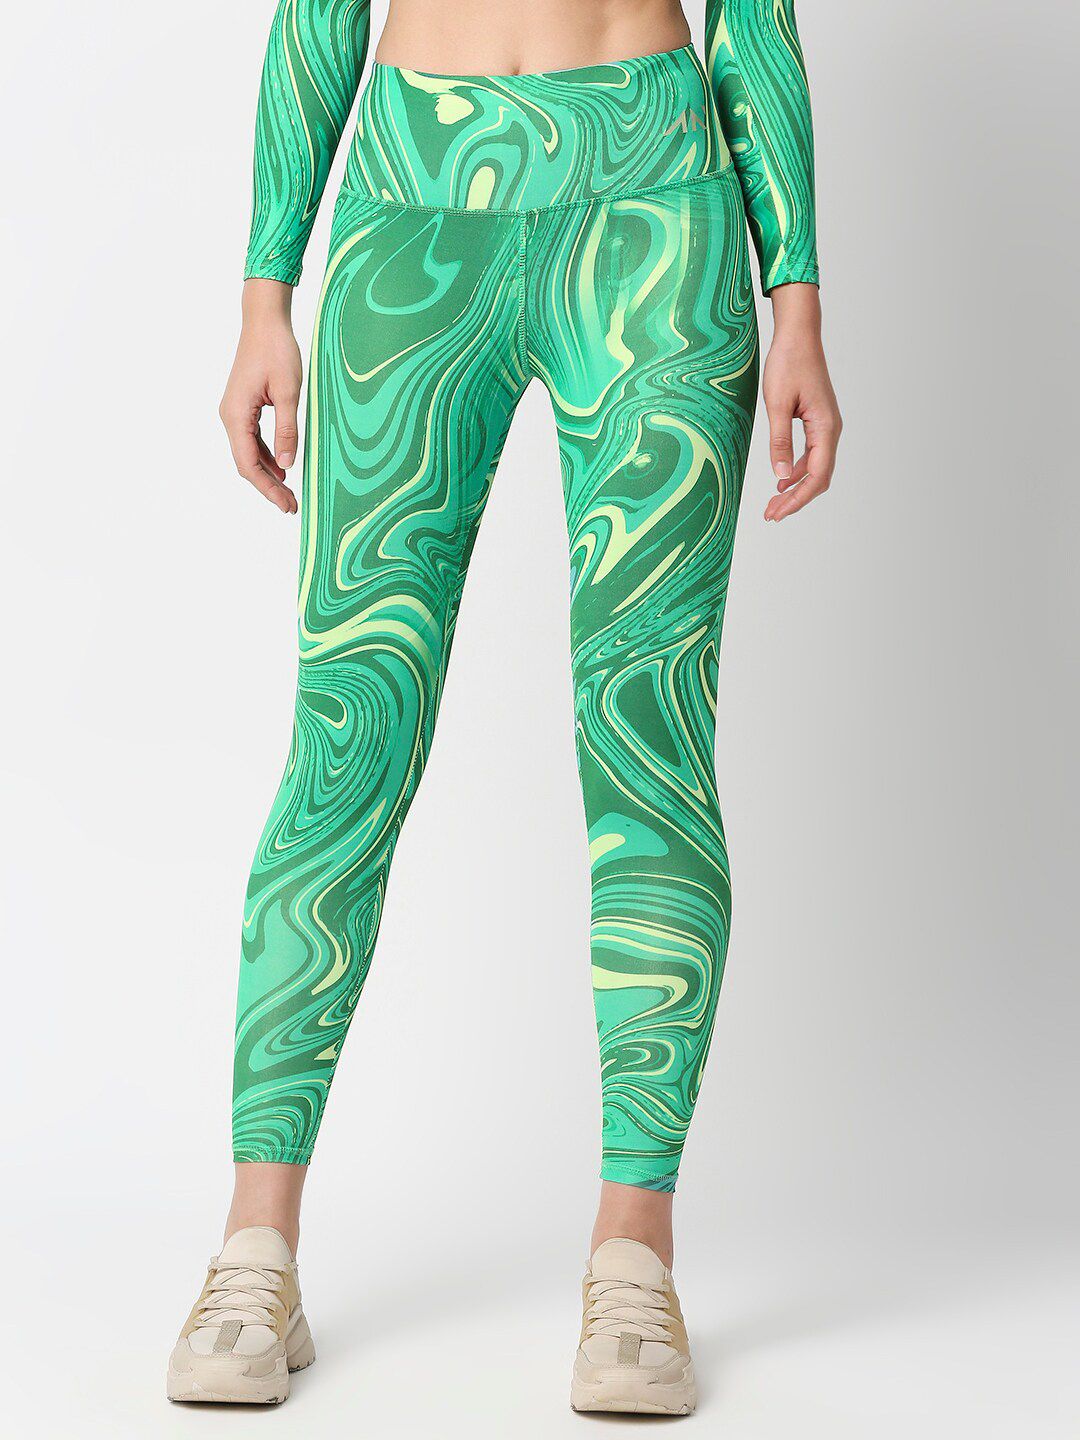 AESTHETIC NATION Women Green Printed Dry Fit Tights Price in India